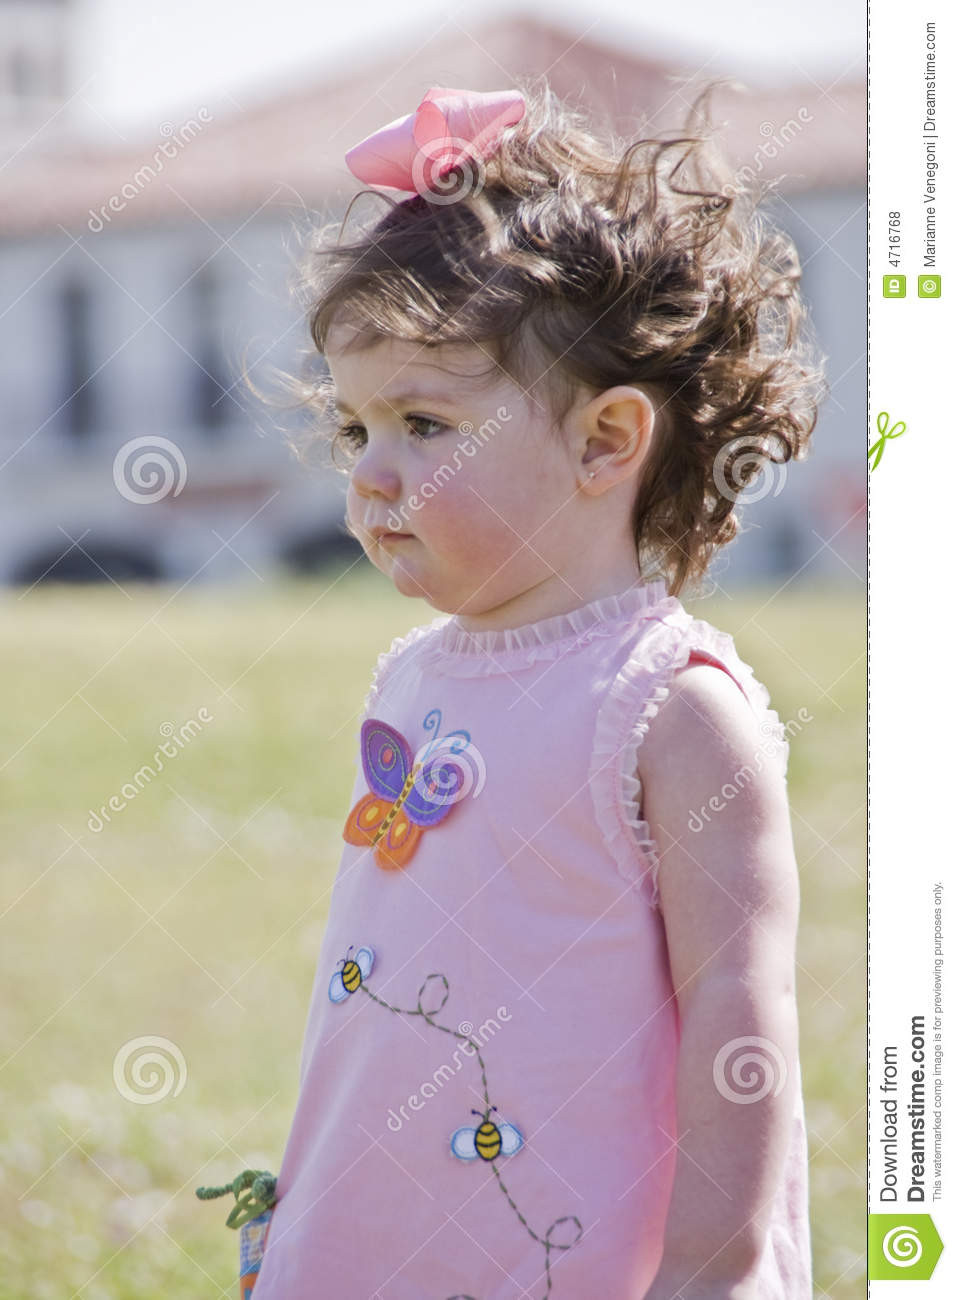 Hairstyle For Little Girls With Curly Hair
 Little Girl With Curly Hair Stock Image of